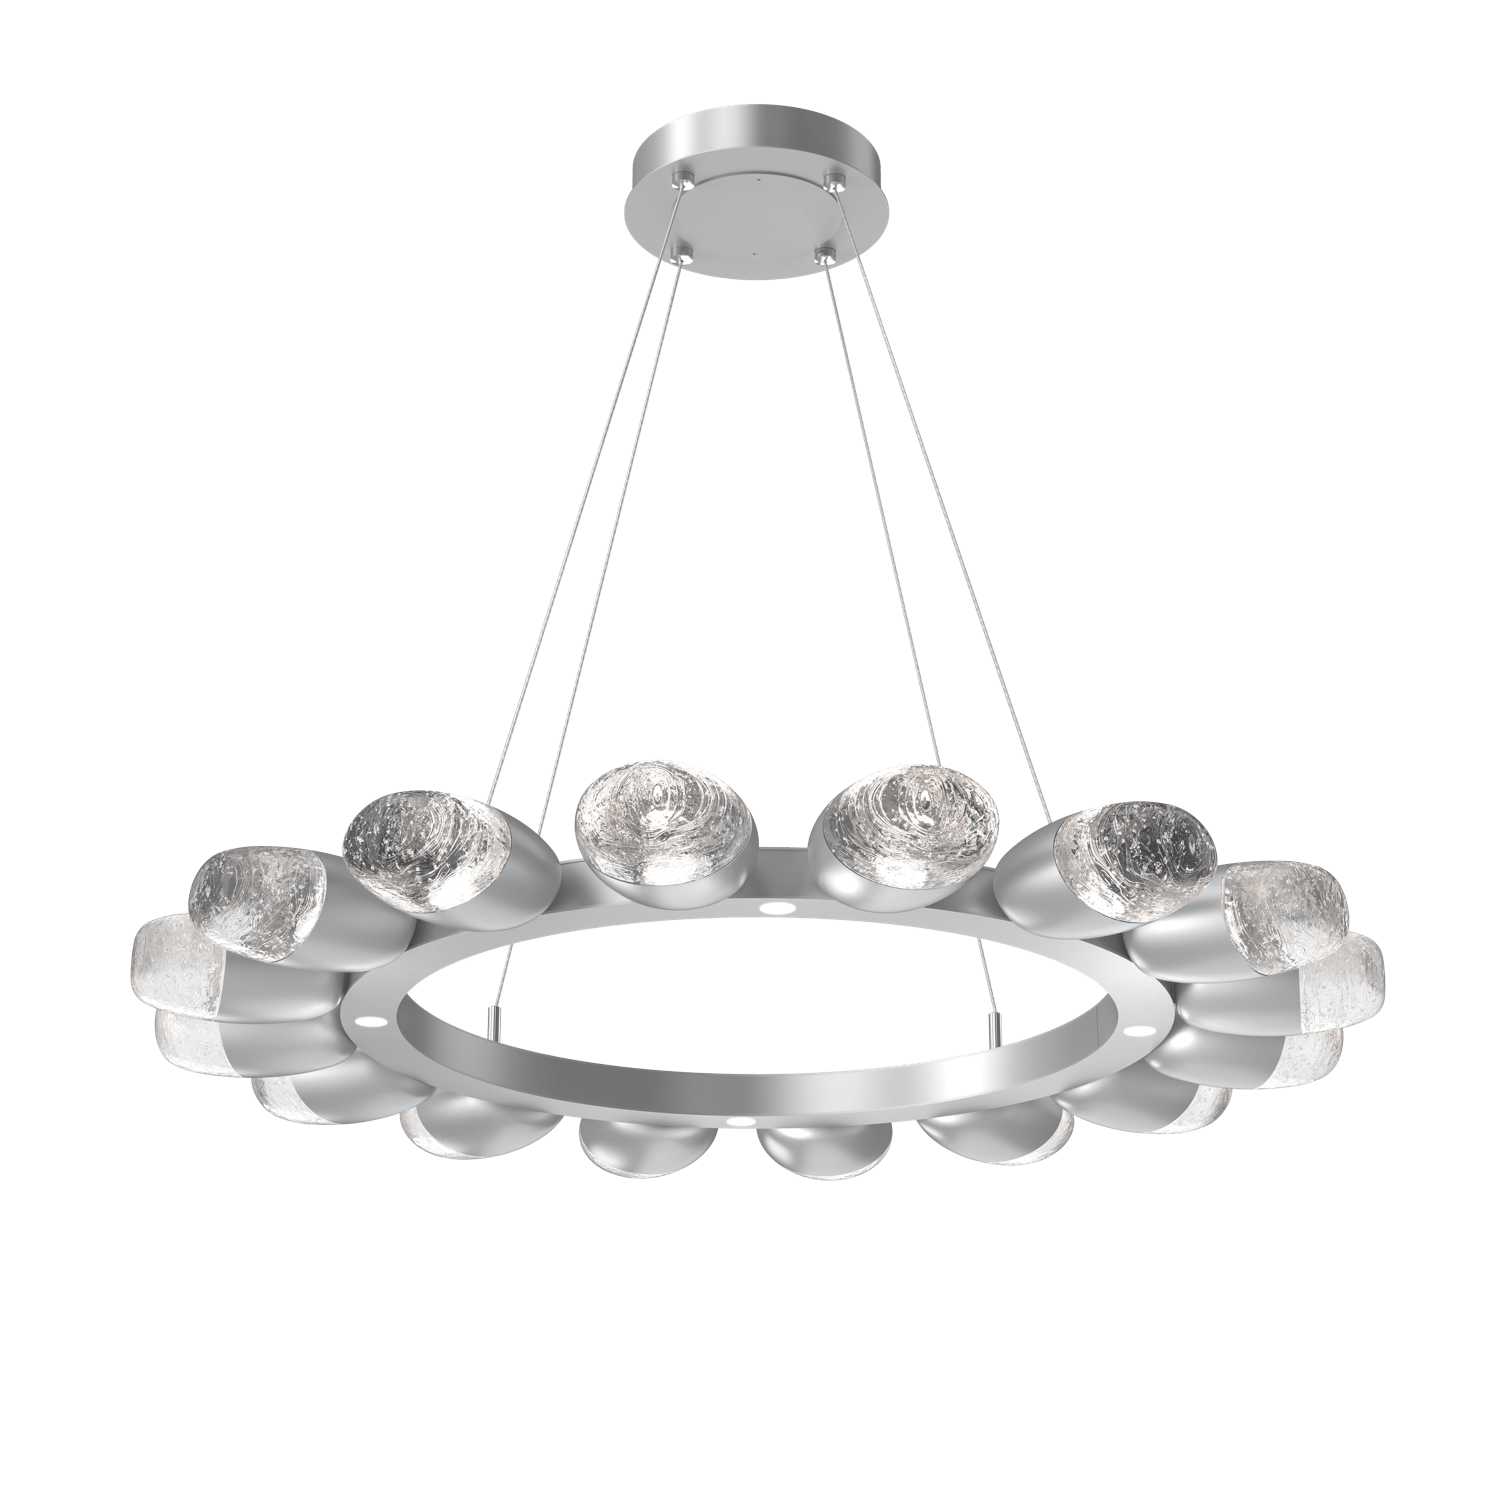 CHB0079-36-CS-Hammerton-Studio-Pebble-36-inch-radial-ring-chandelier-with-classic-silver-finish-and-clear-cast-glass-shades-and-LED-lamping